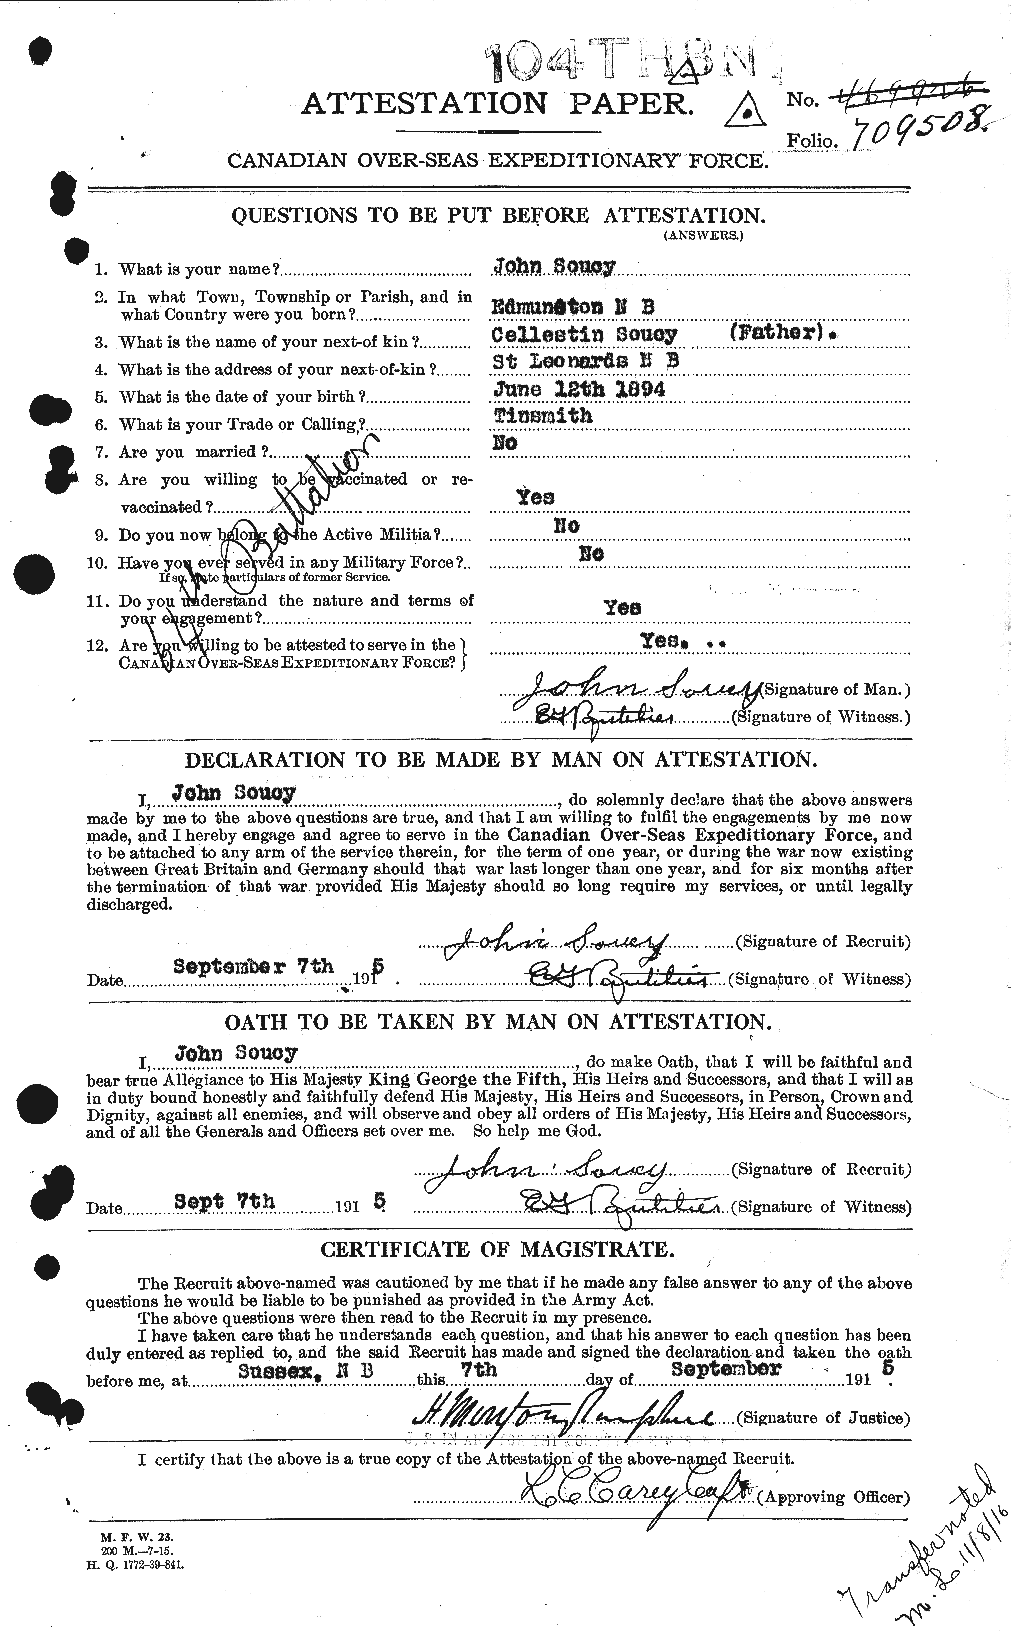 Personnel Records of the First World War - CEF 109232a